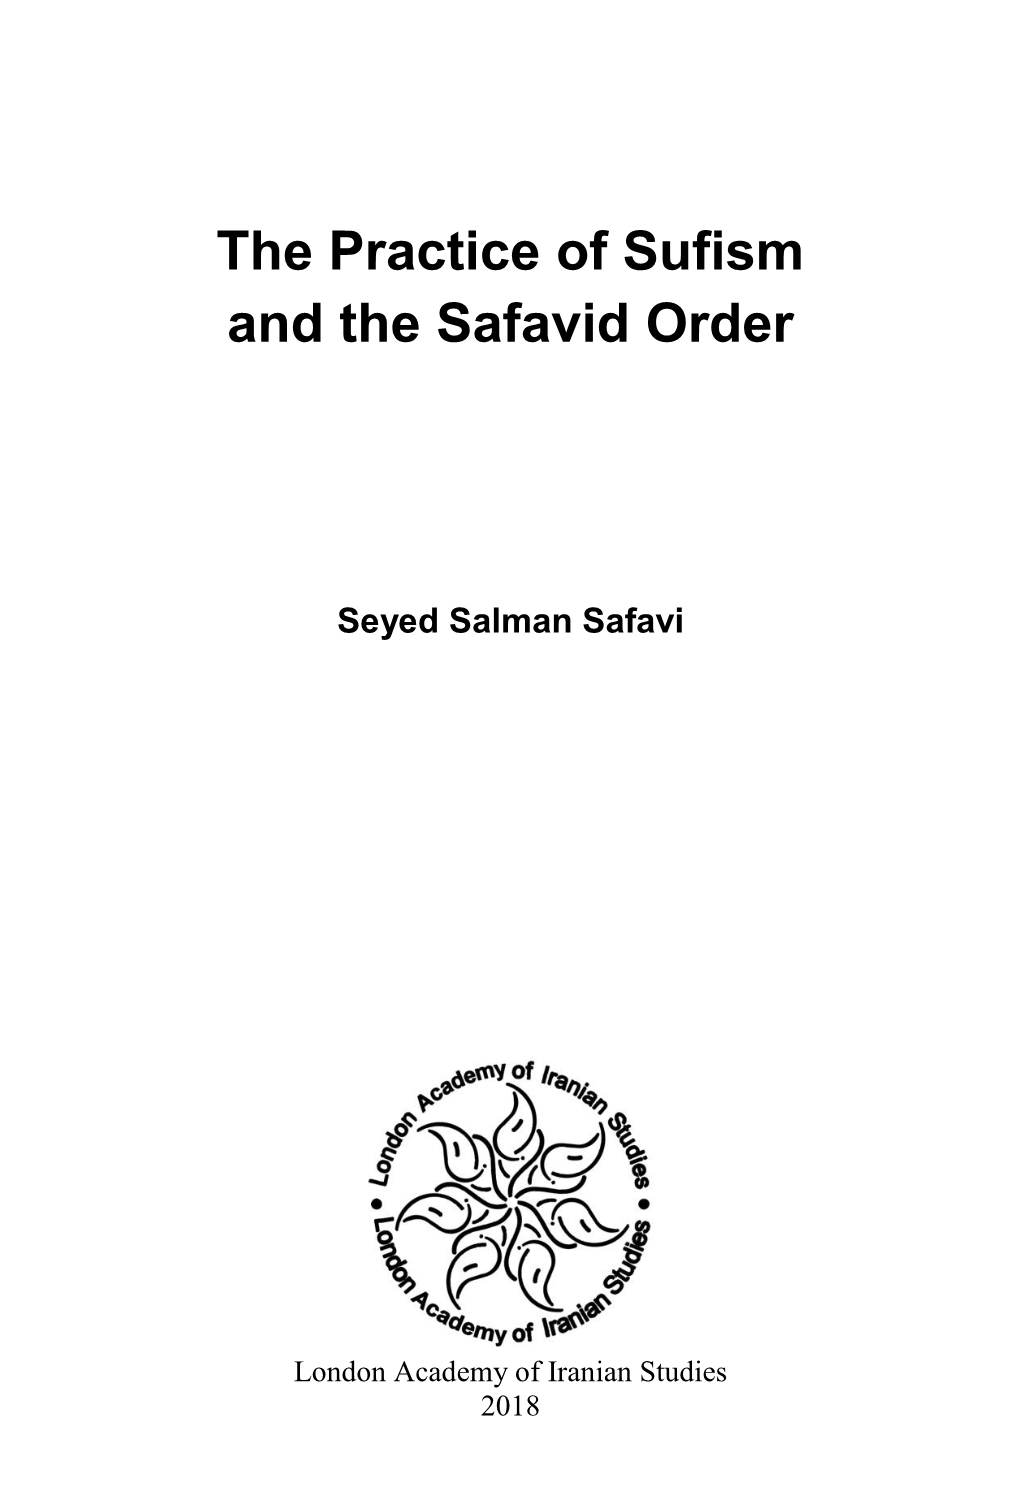 The Practice of Sufism and the Safavid Order